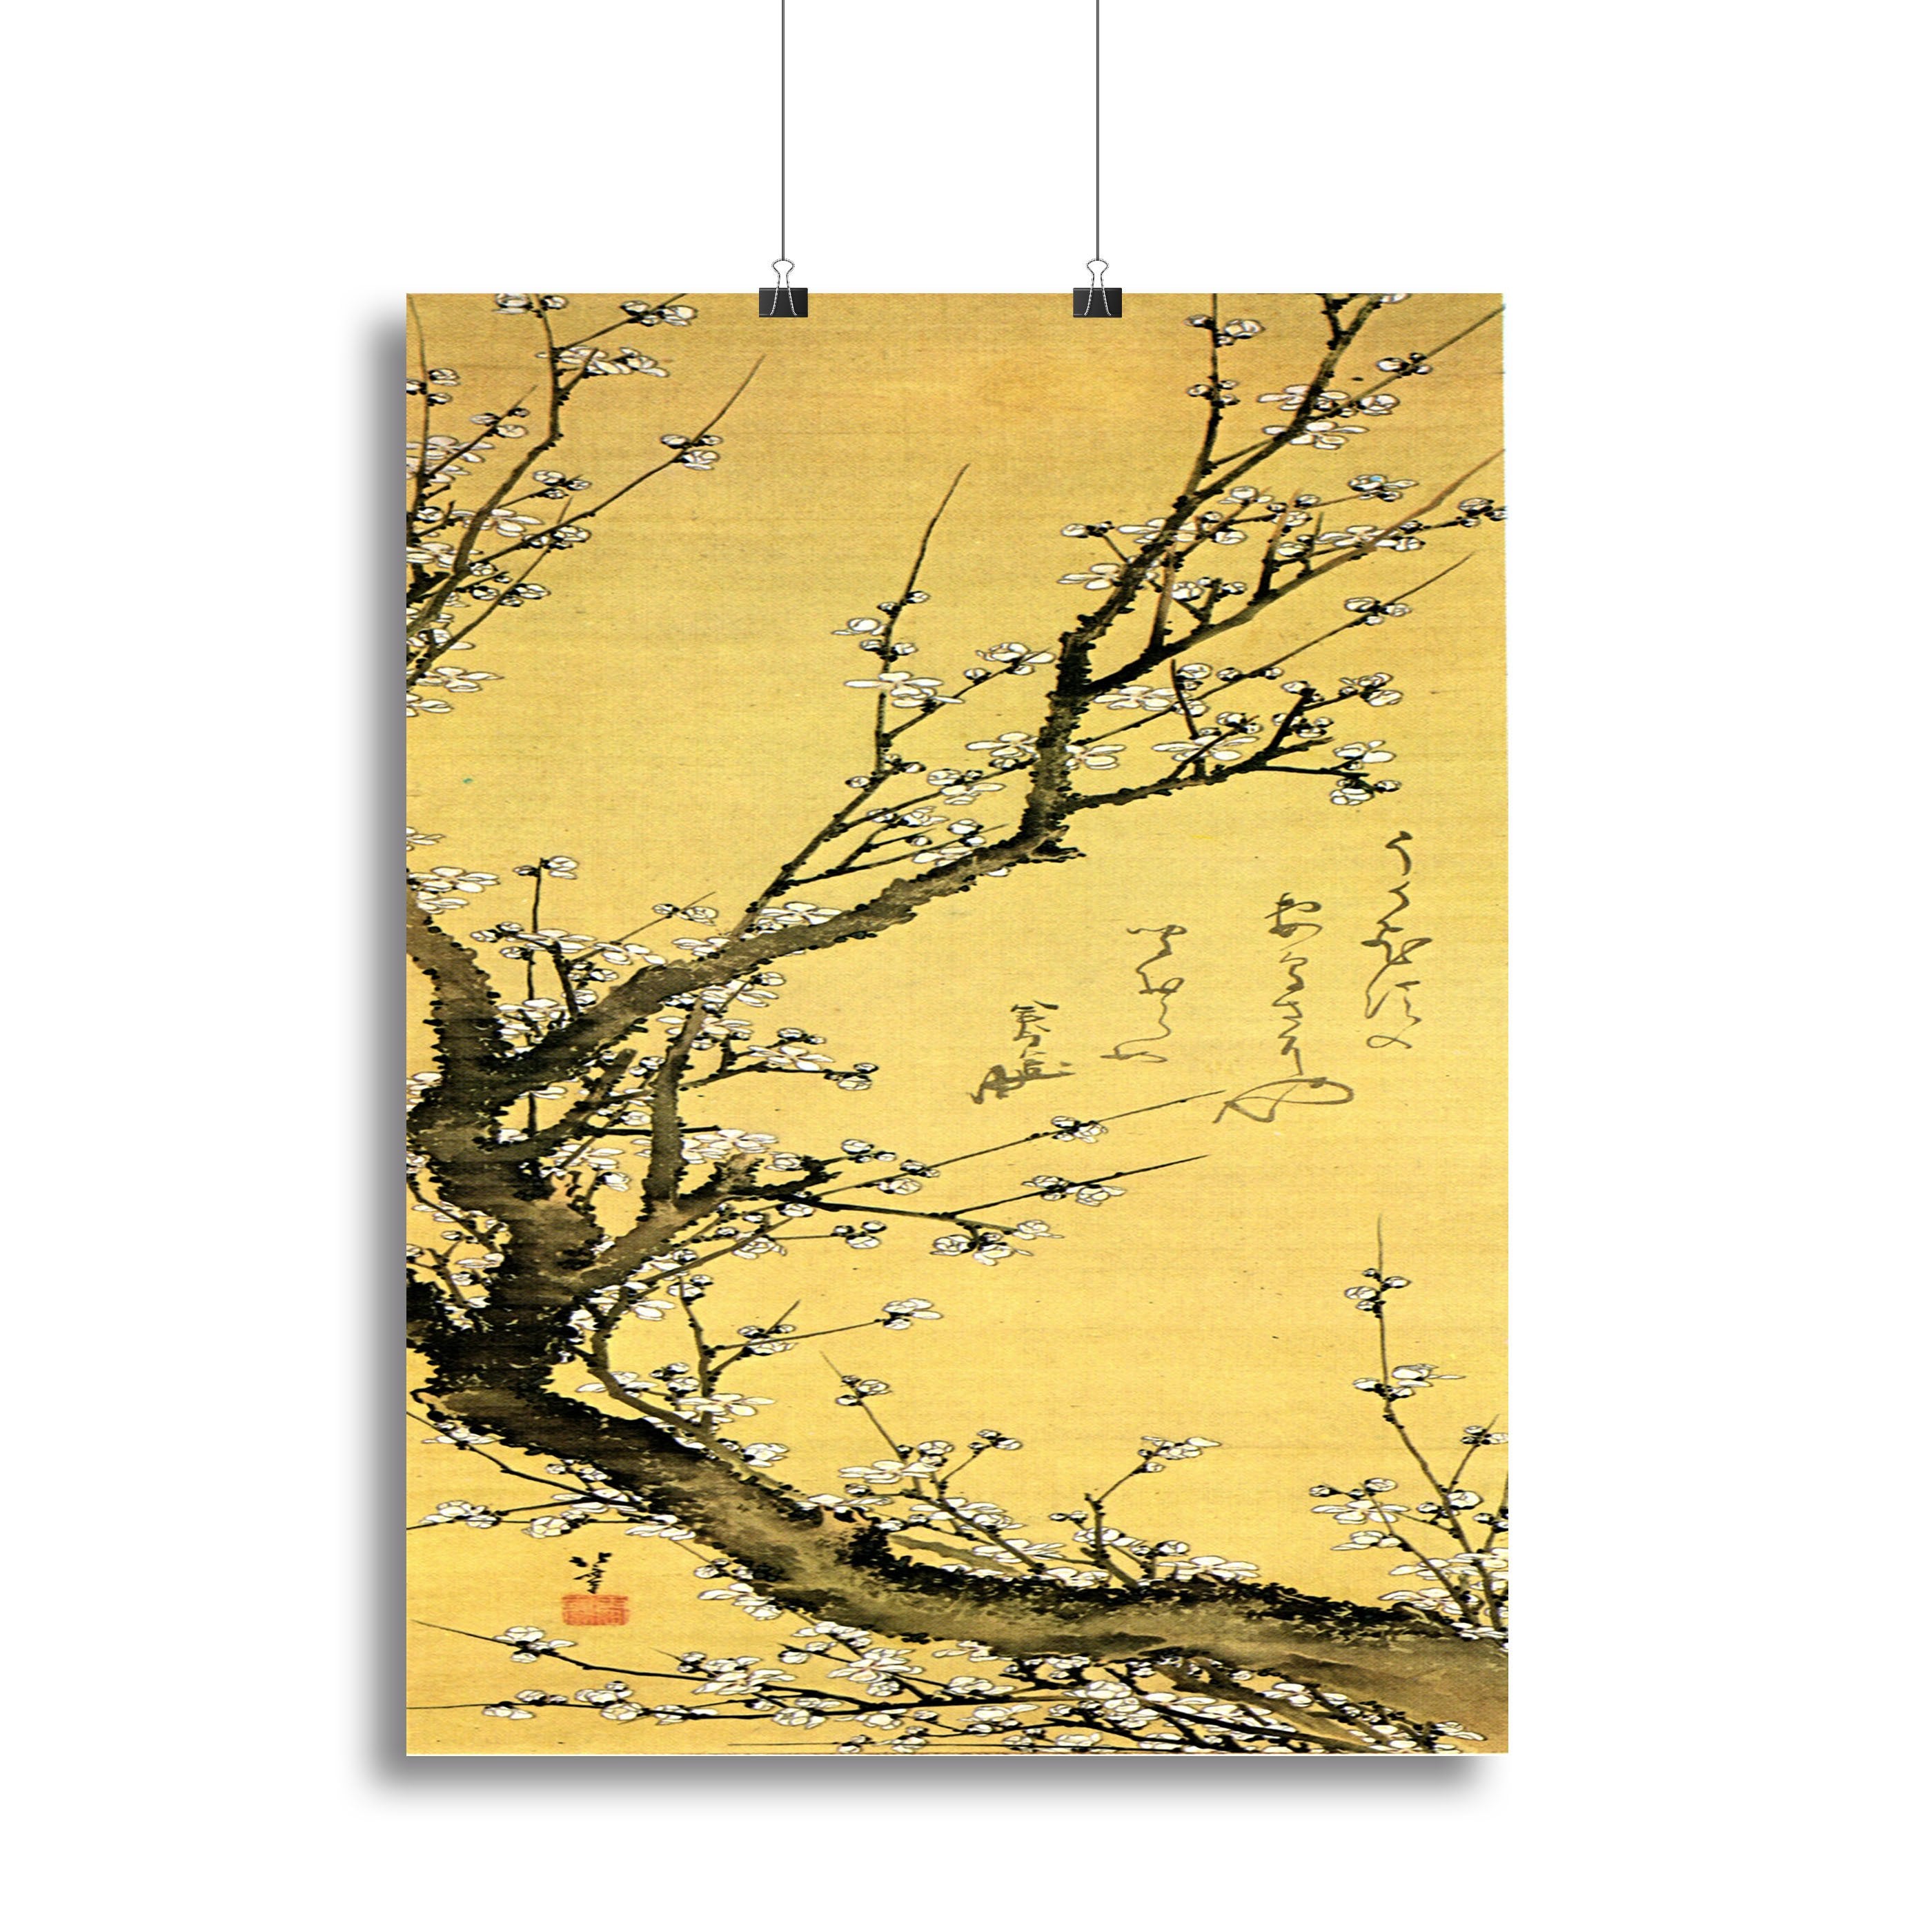 Flowering plum by Hokusai Canvas Print or Poster